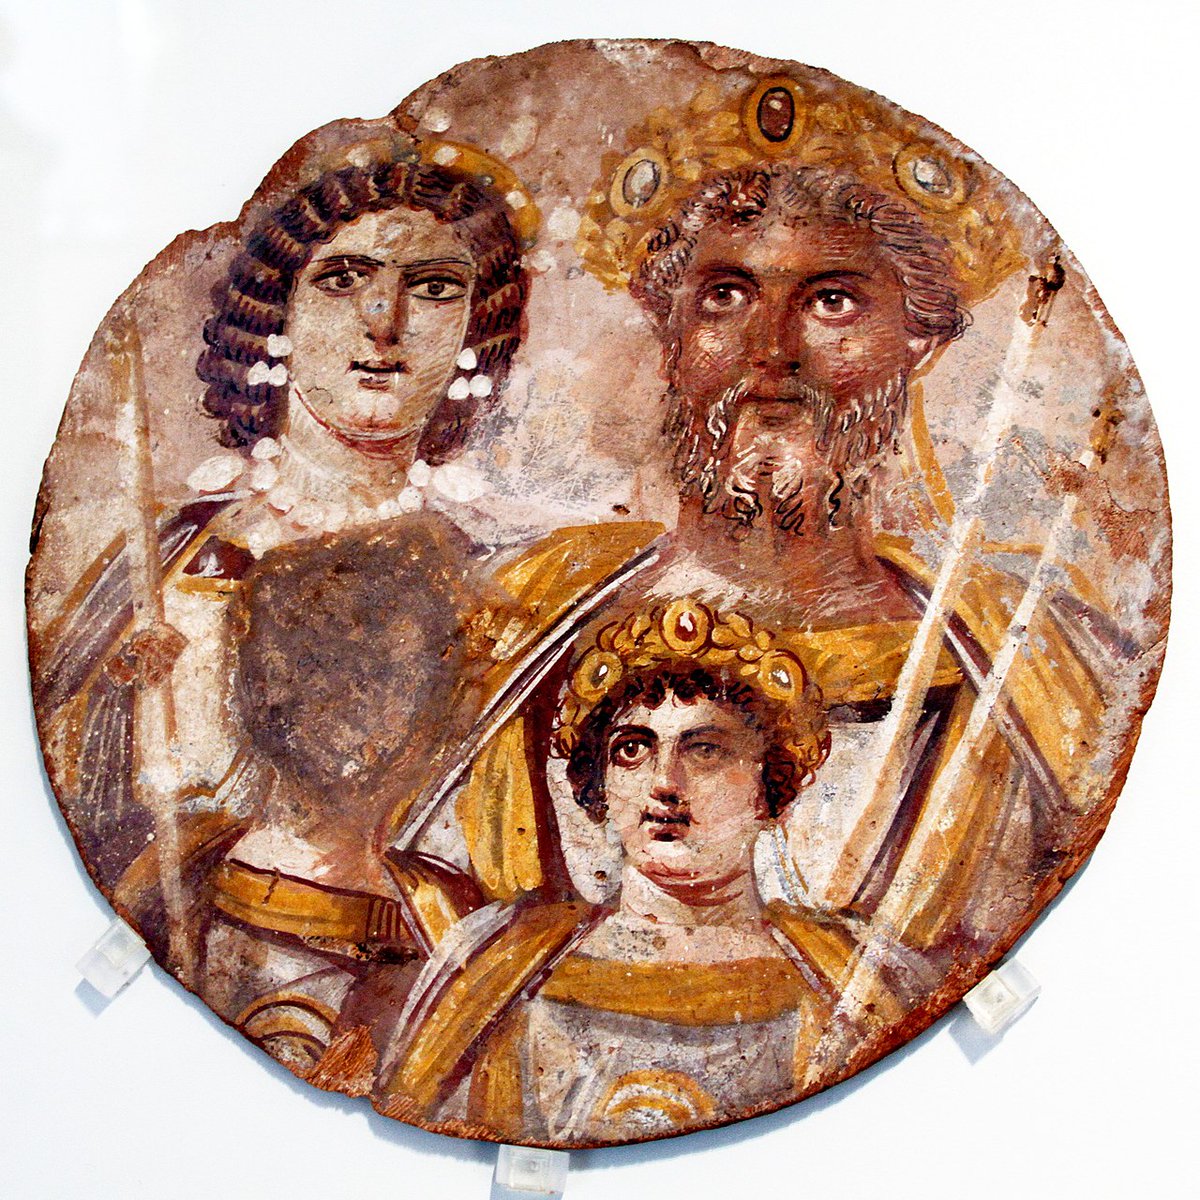 Finally, the Severan dynasty and Beirut typify "male power" in my upcoming book on "female power" in late antique Arabia. Also, who knew that brown-folk once ruled the Roman Empire!